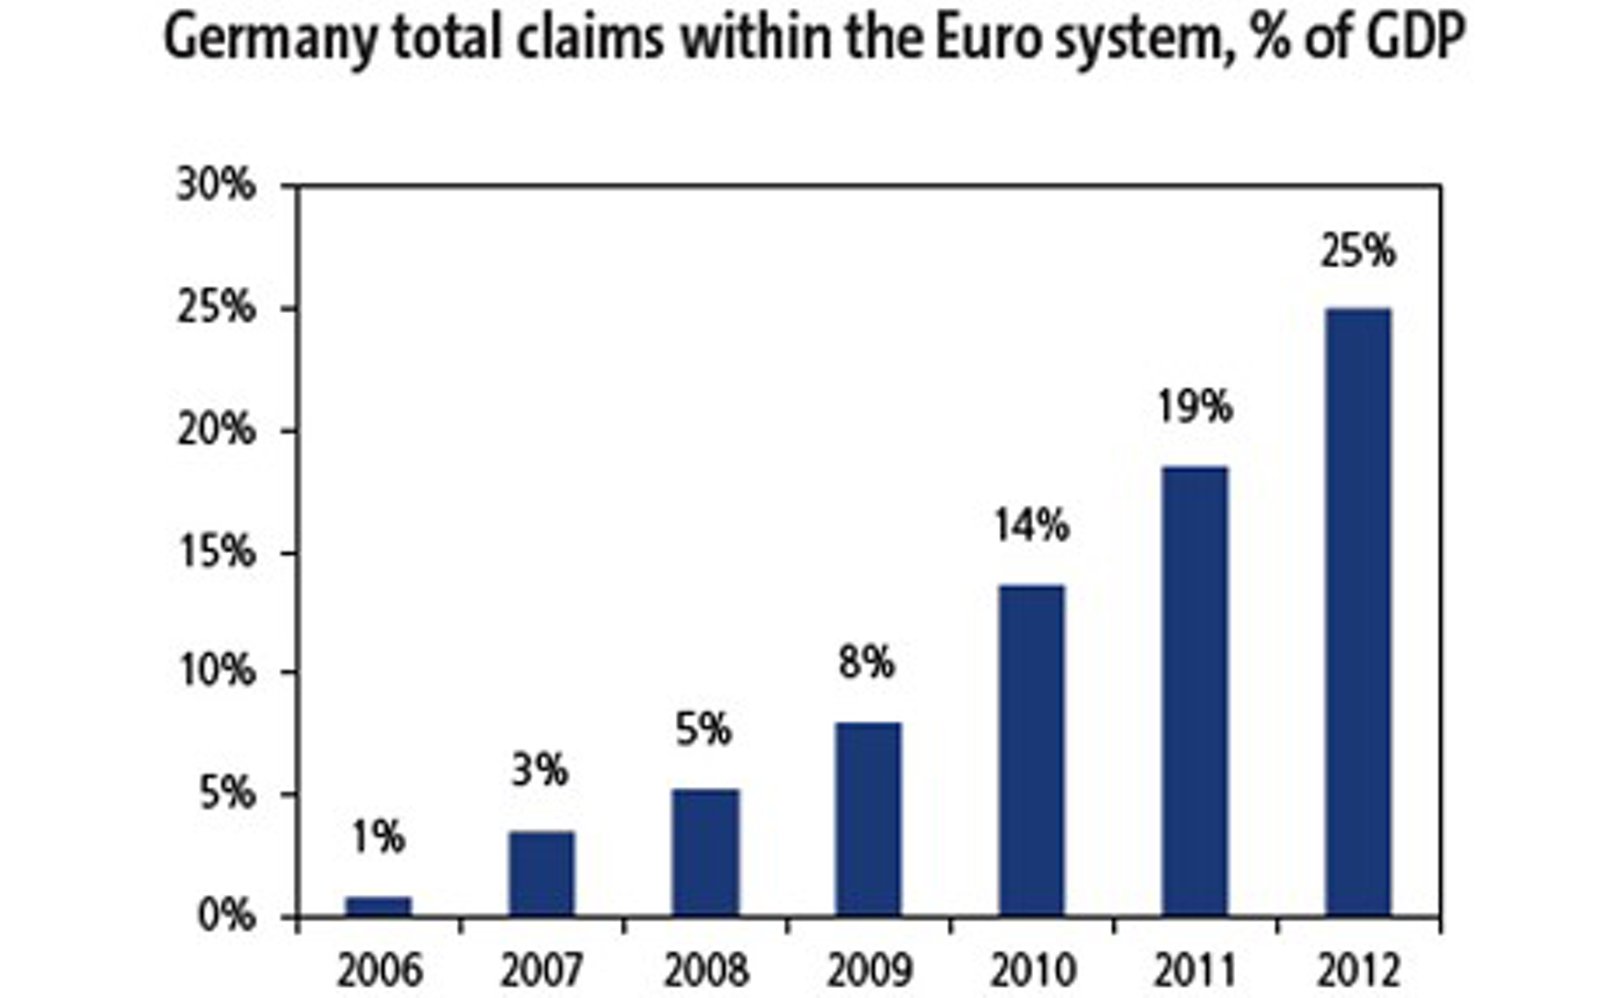 http://einarbb.blog.is/users/72/einarbb/img/germany_total_claims_within_the_ez_system.jpg